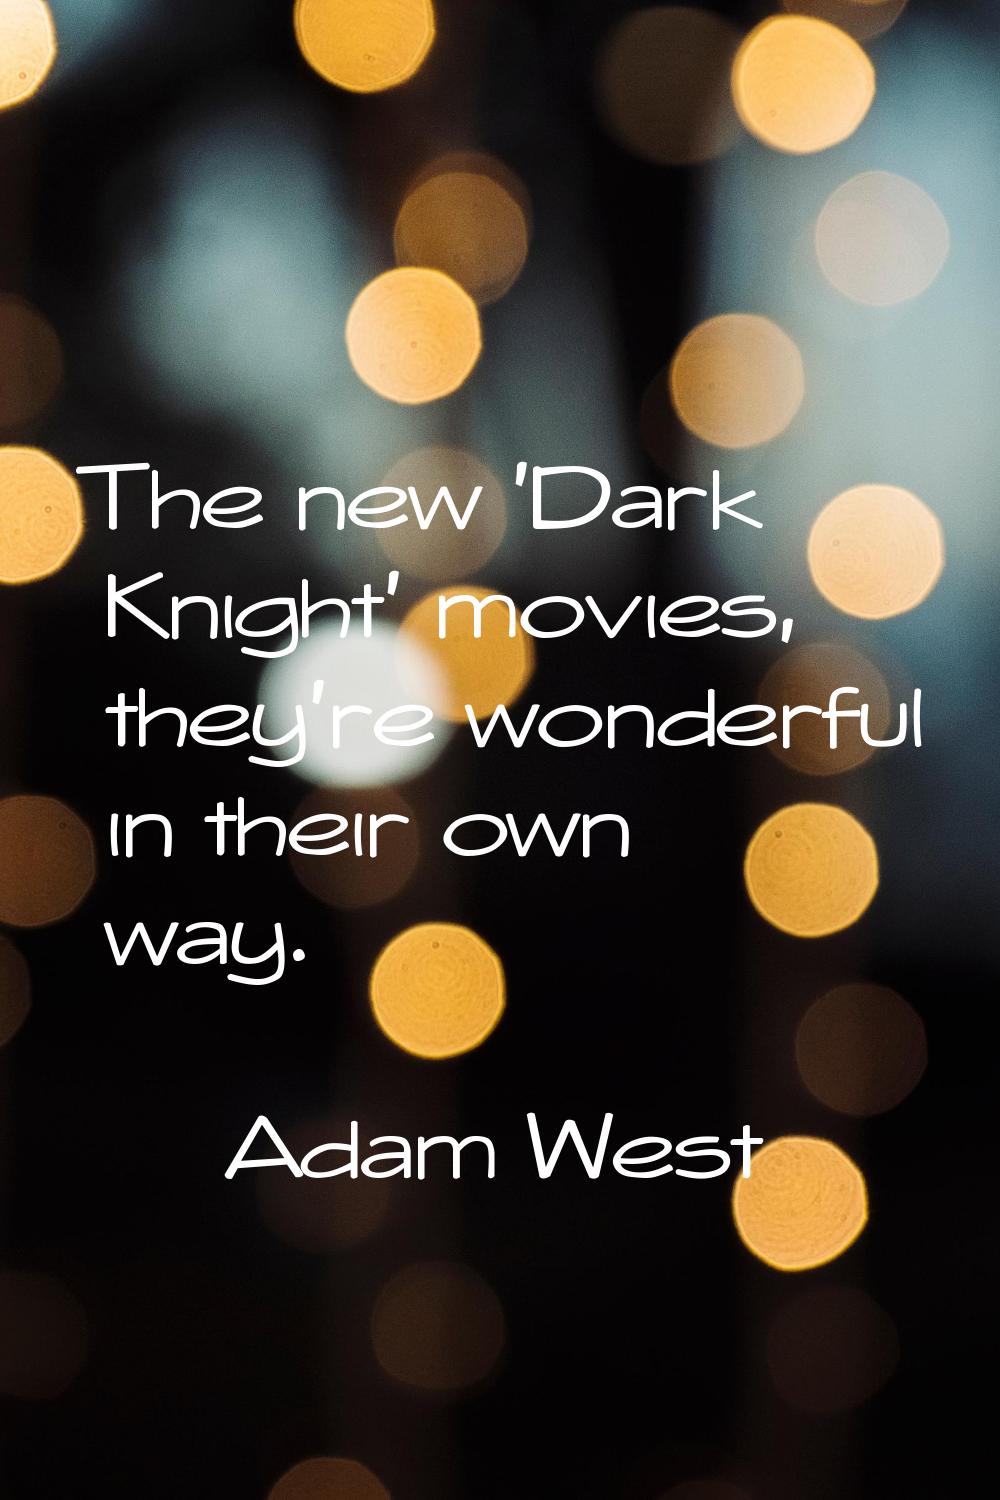 The new 'Dark Knight' movies, they're wonderful in their own way.